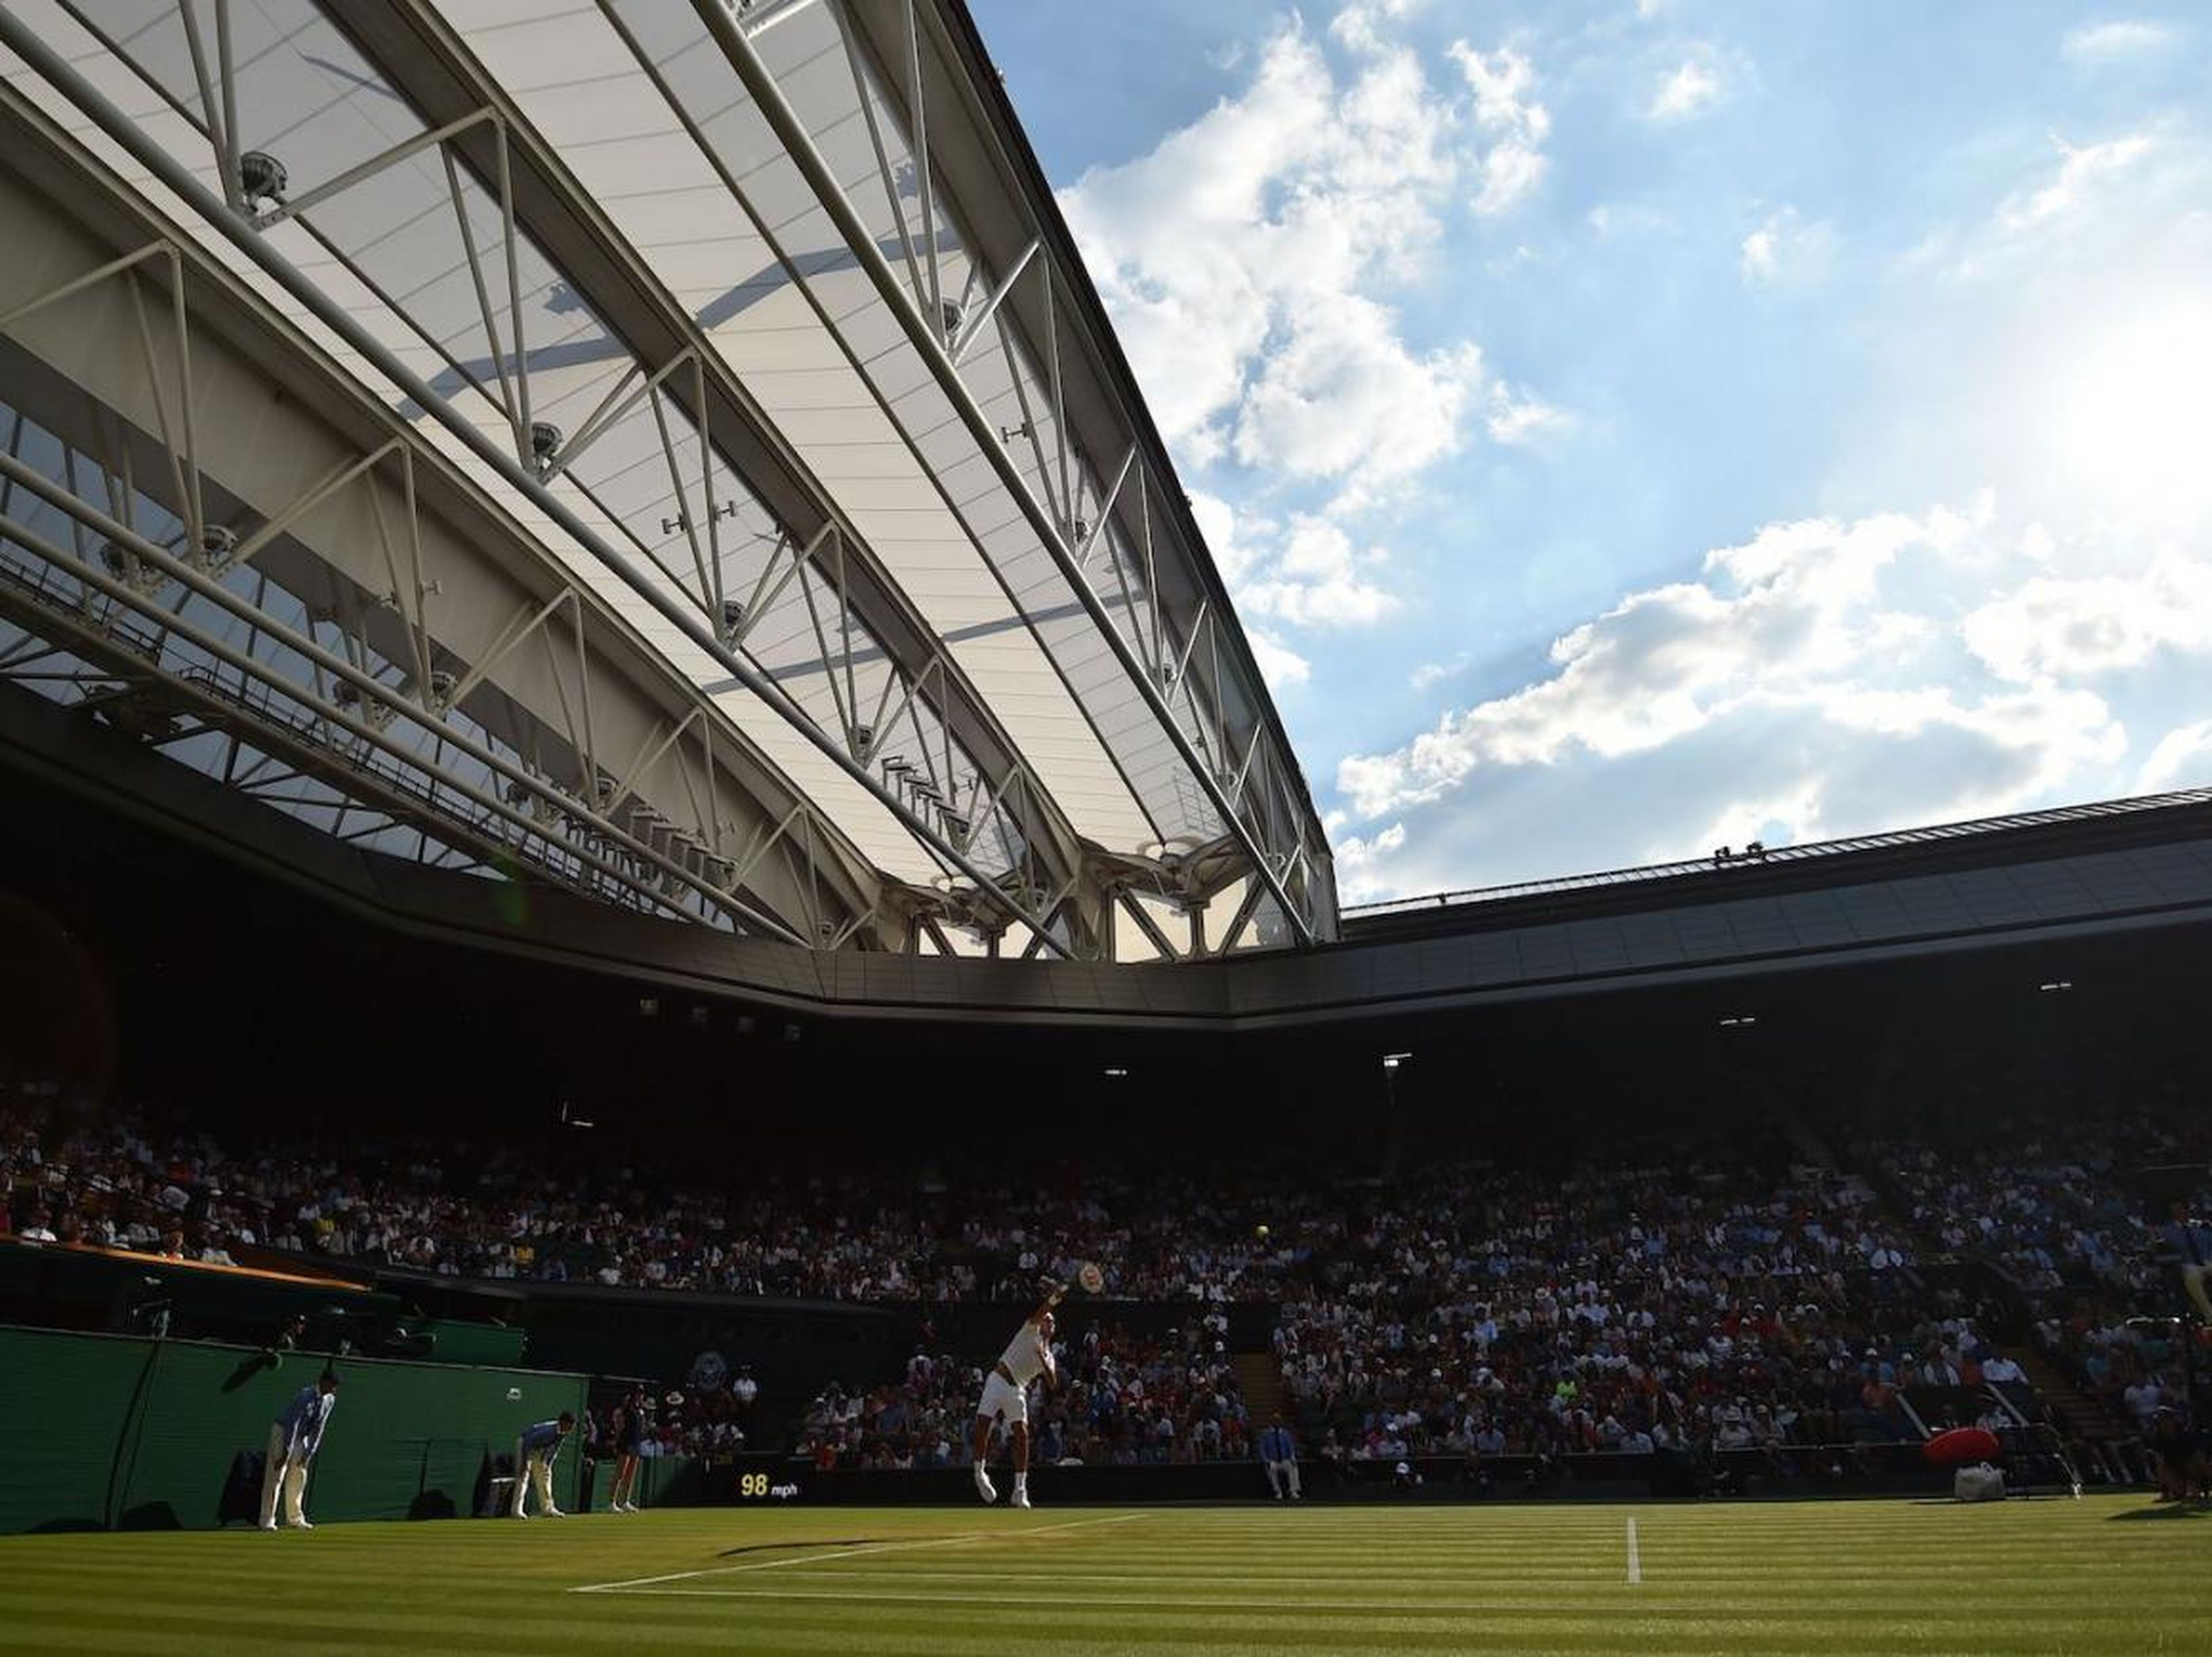 The views at Wimbledon are always stunning.